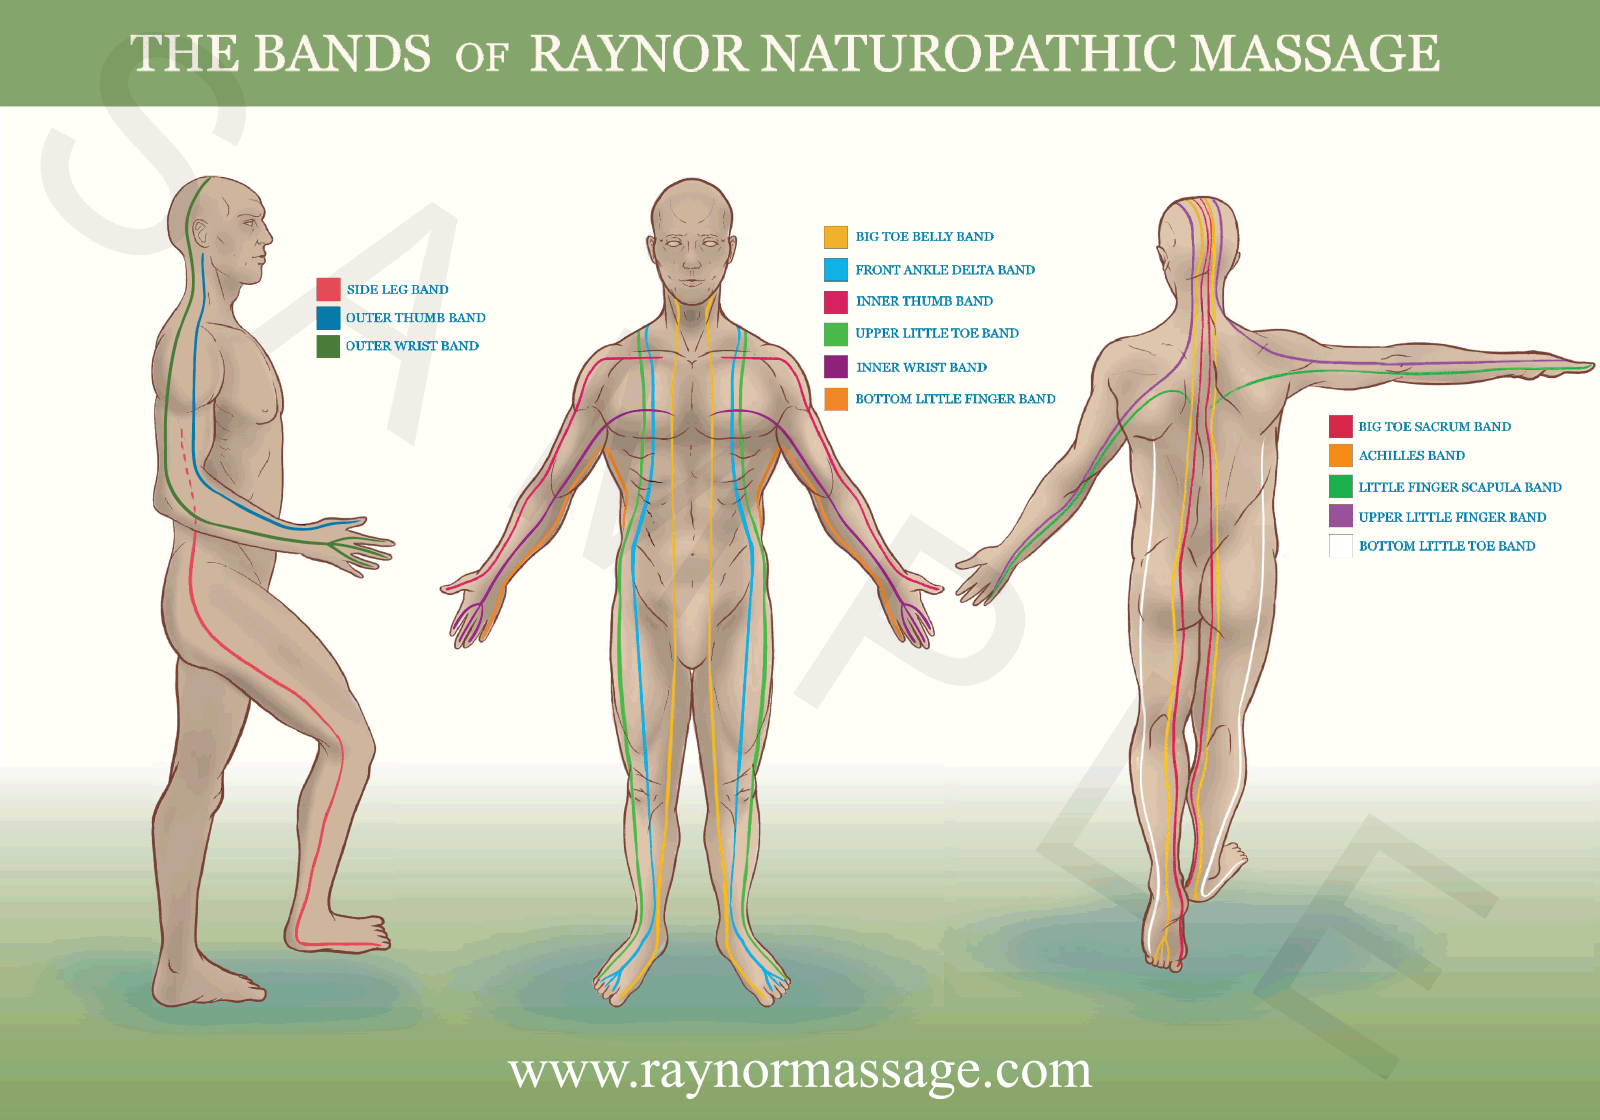 raynor-massage-bands-poster